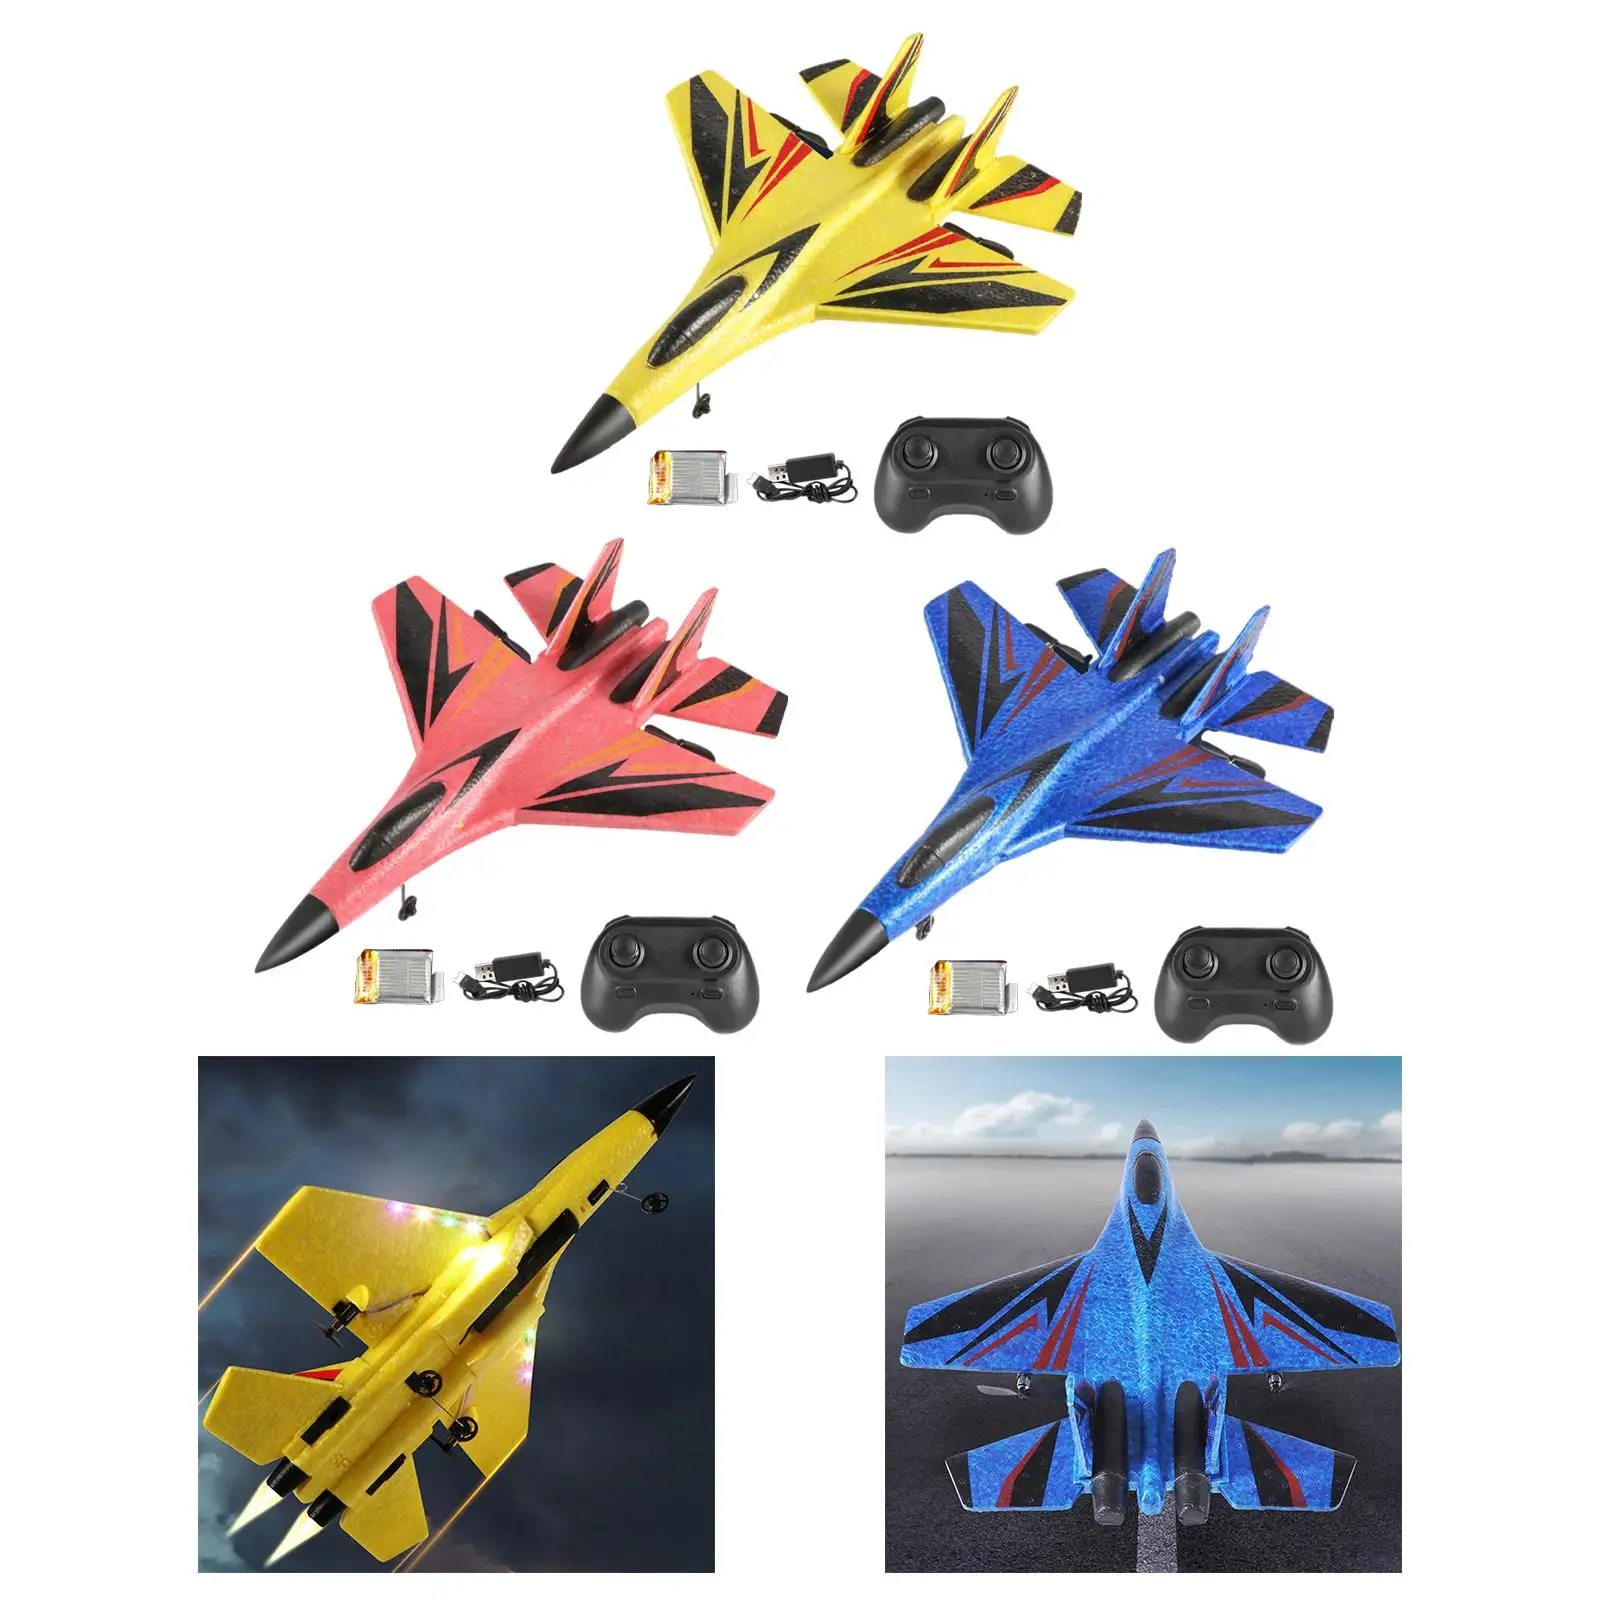 Jet Fighter Toys SU30 Aircraft Model Toys Lightweight Glider Fighter Toys Easy to Control Foam RC Glider for Kids Birthday Gifts